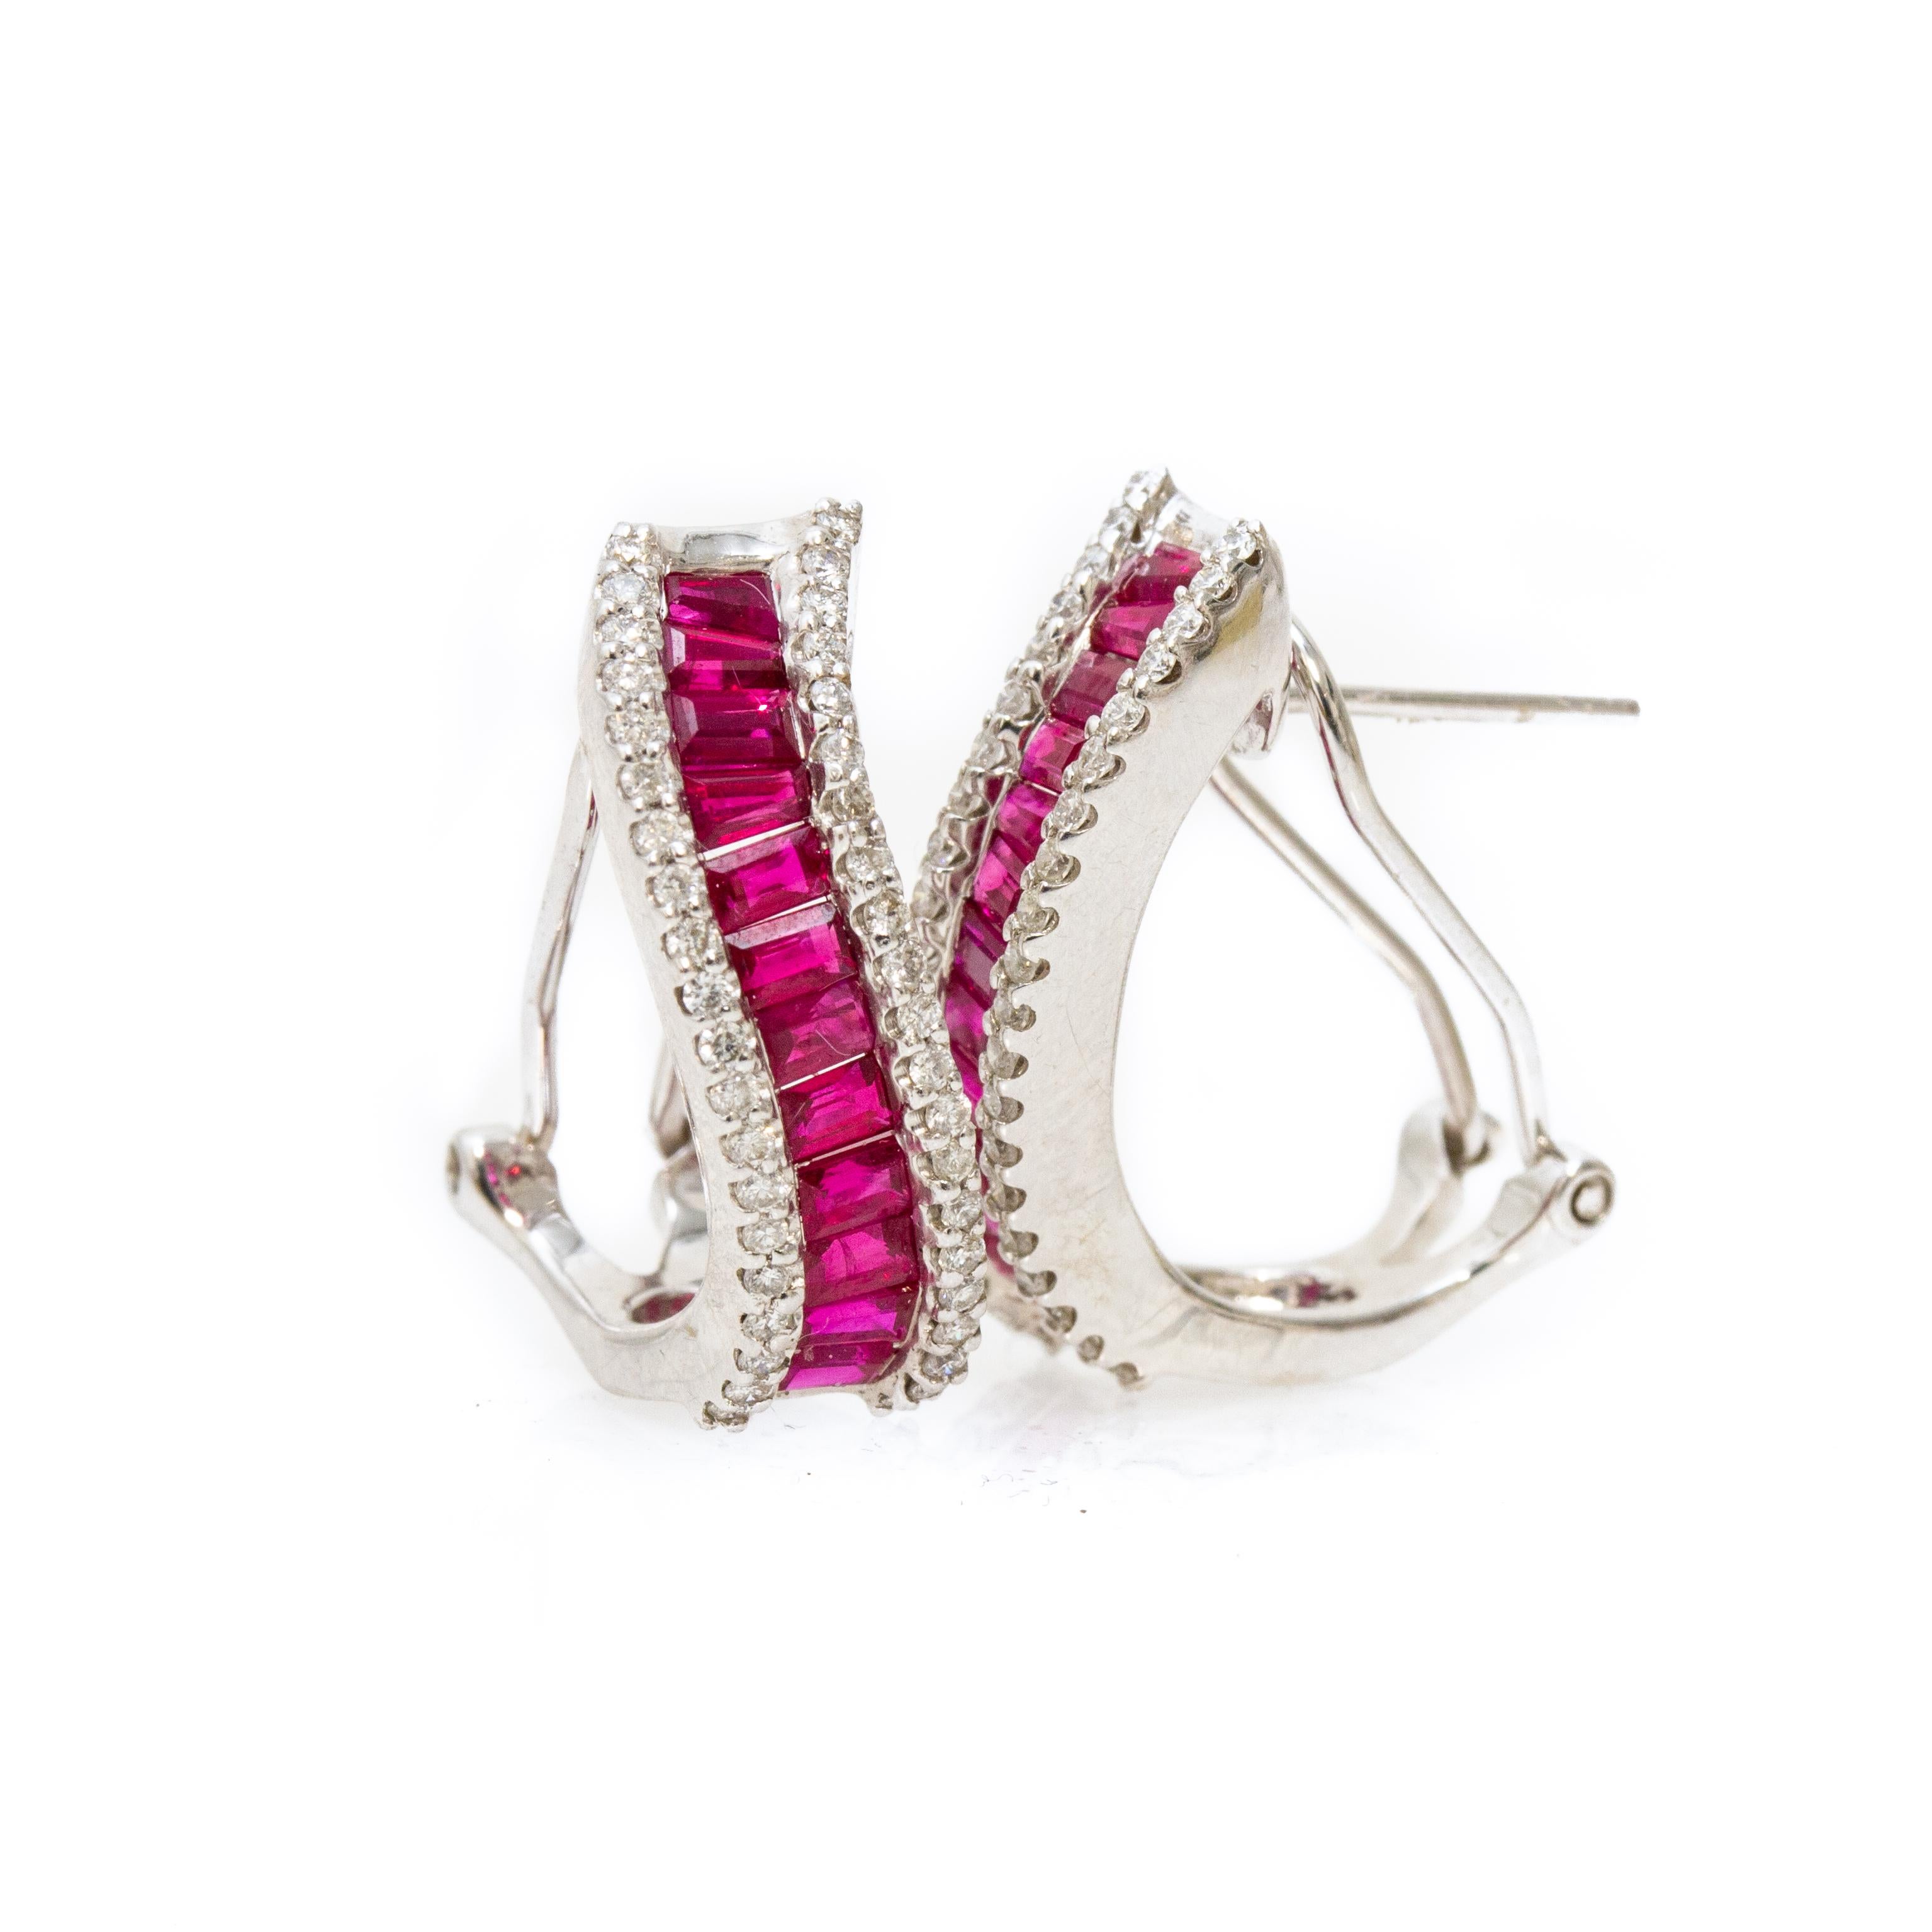 Contemporary 18 Karat White Gold, Ruby and Diamond Clip Earrings